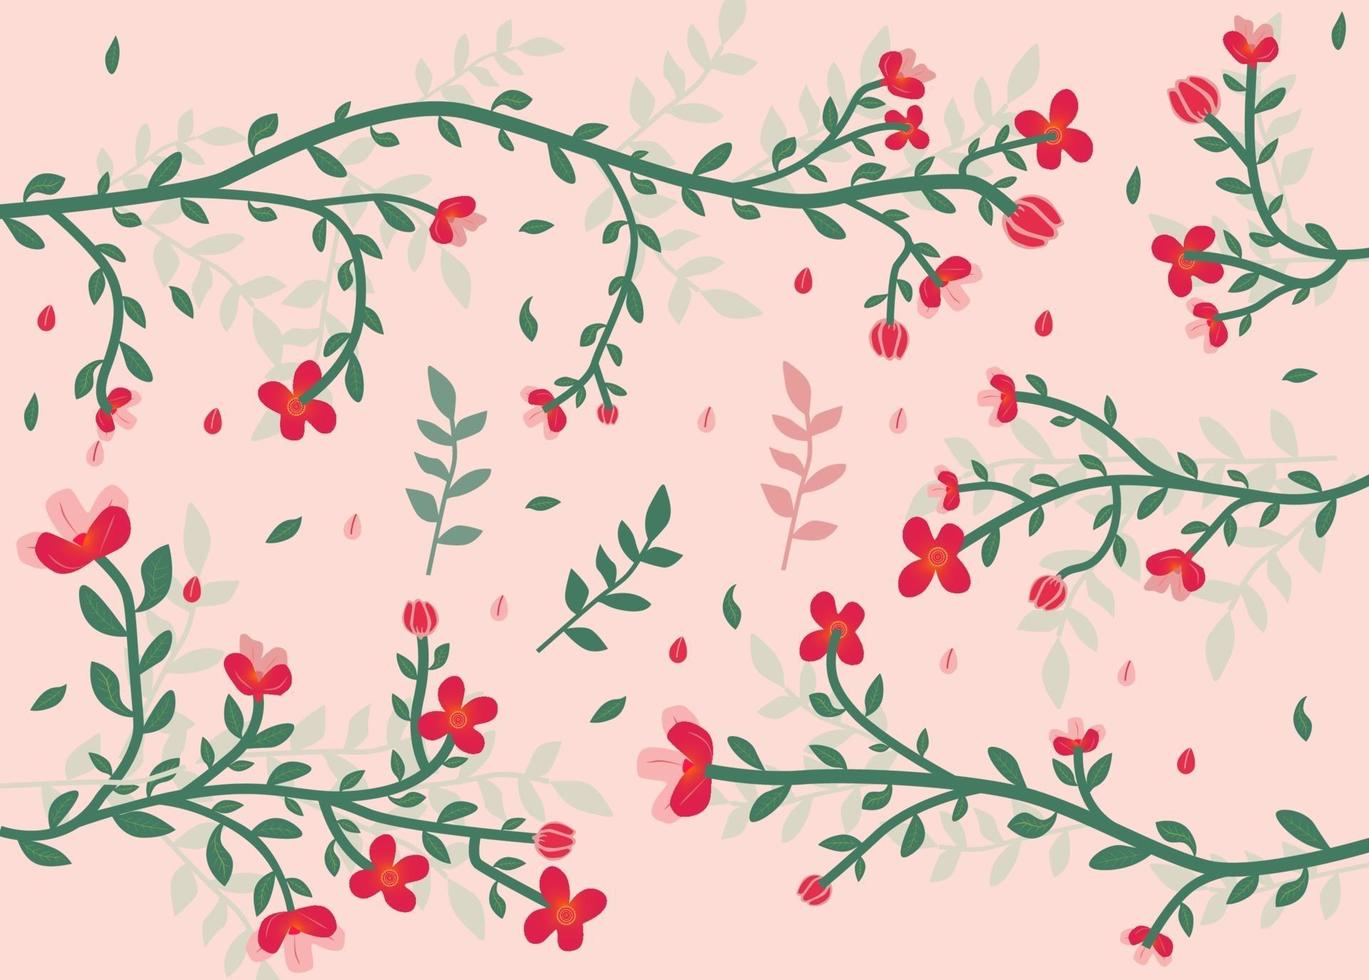 Floral Branches and Leaves Pattern Background vector